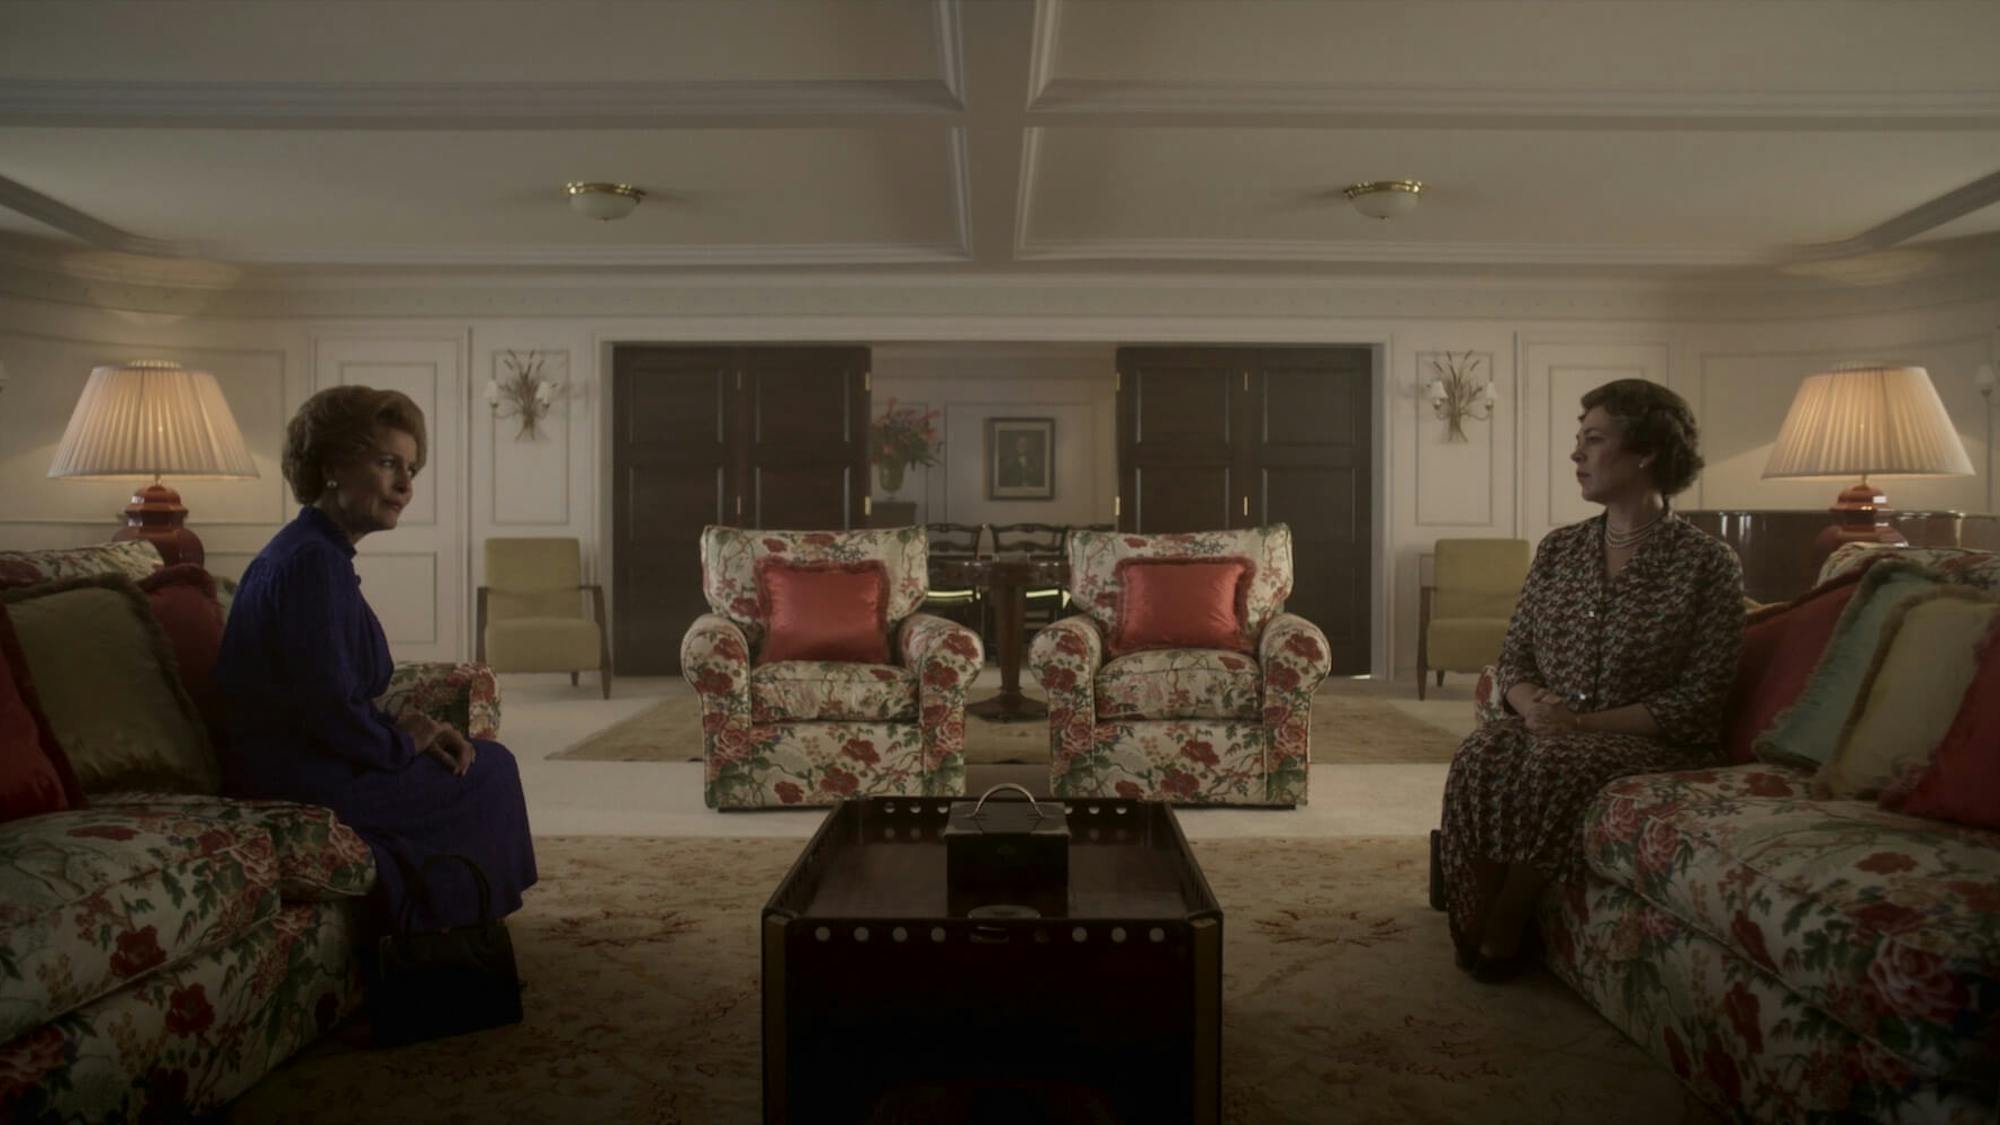 Margaret Thatcher (Gillian Anderson) and Queen Elizabeth (Olivia Colman) sit opposite each other on floral couches in a dimly lit room.